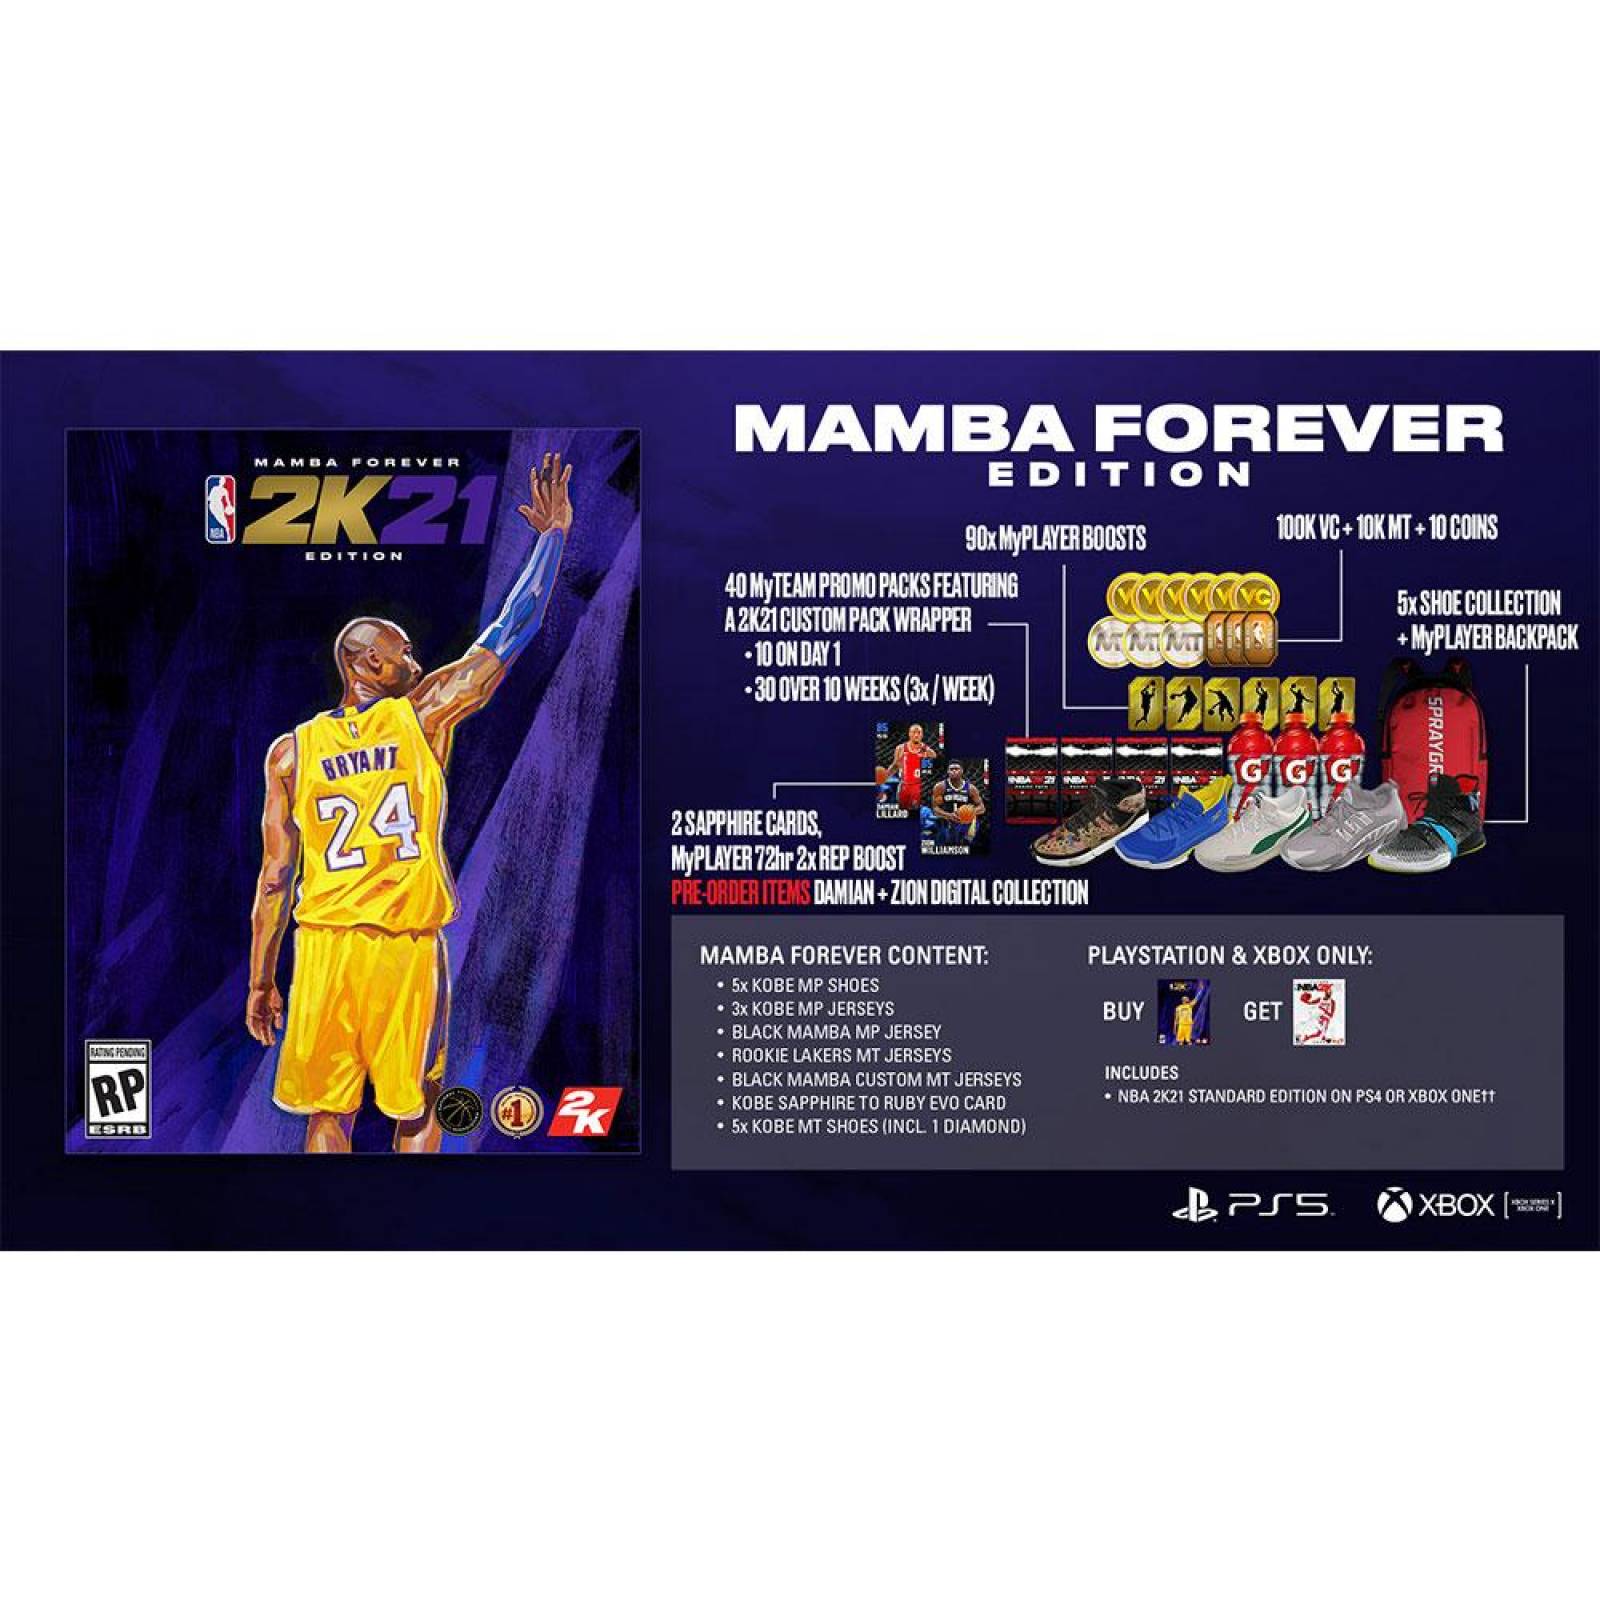 Nba 2K21 Mamba For Ever Edition Xbox Series X - S001 